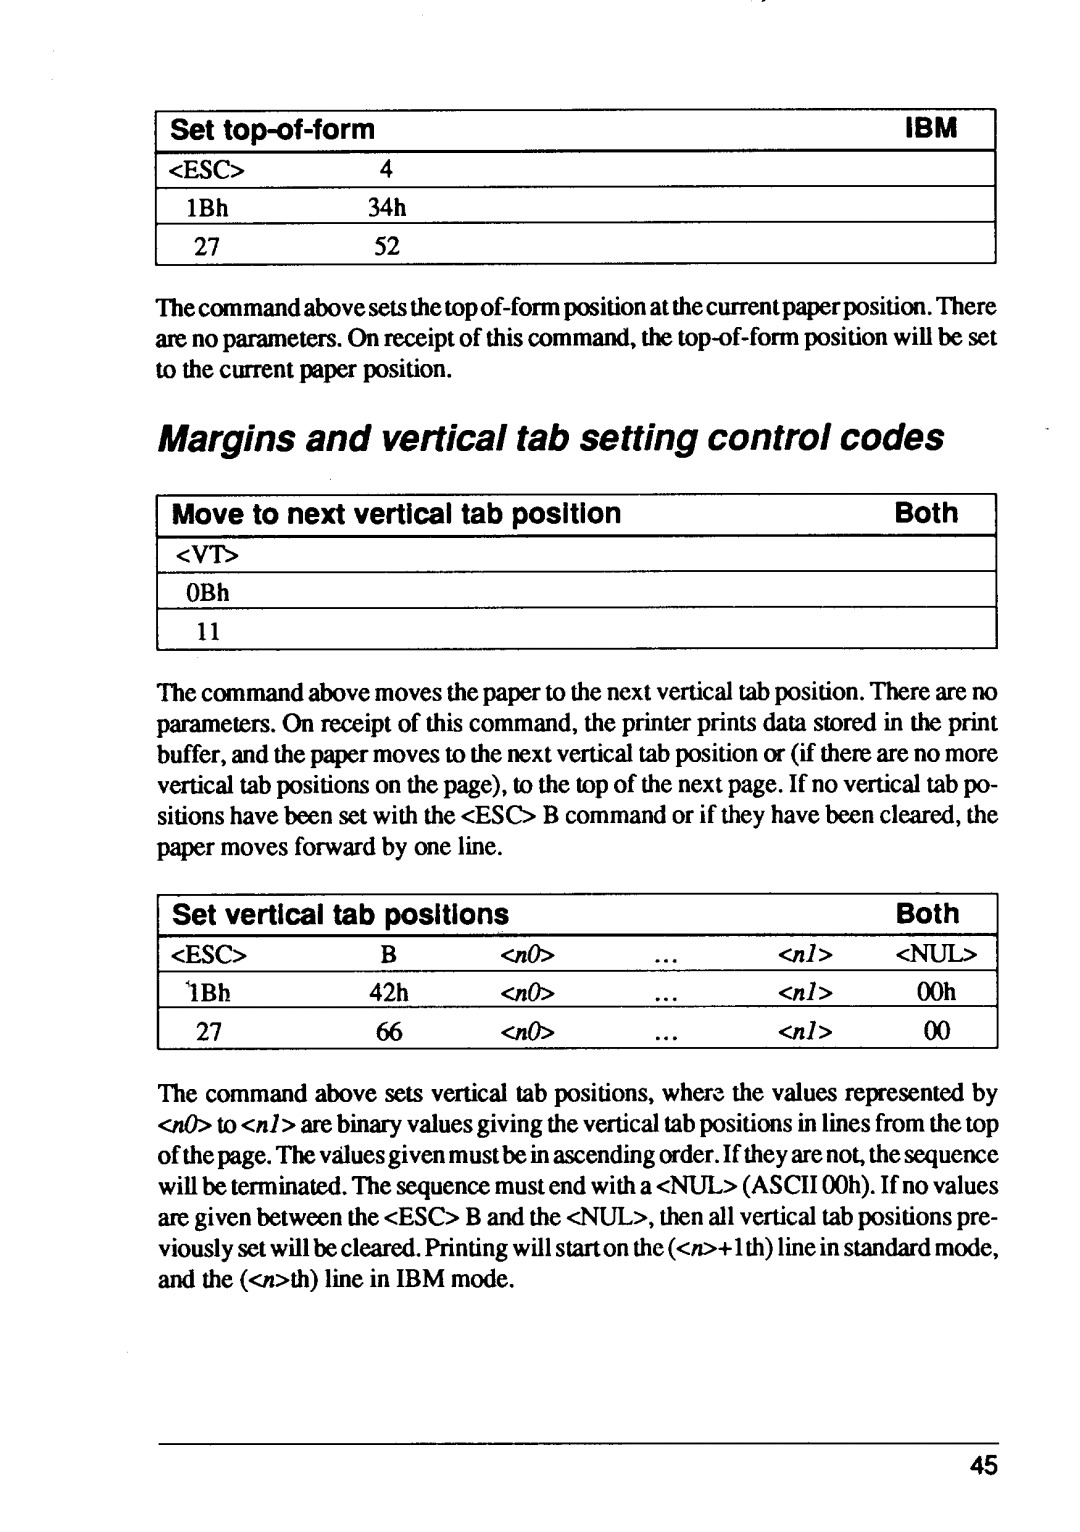 Star Micronics XB24-15, XB24-10 user manual Margins and vertical tab setting control codes, I Set top-of-form, Both 